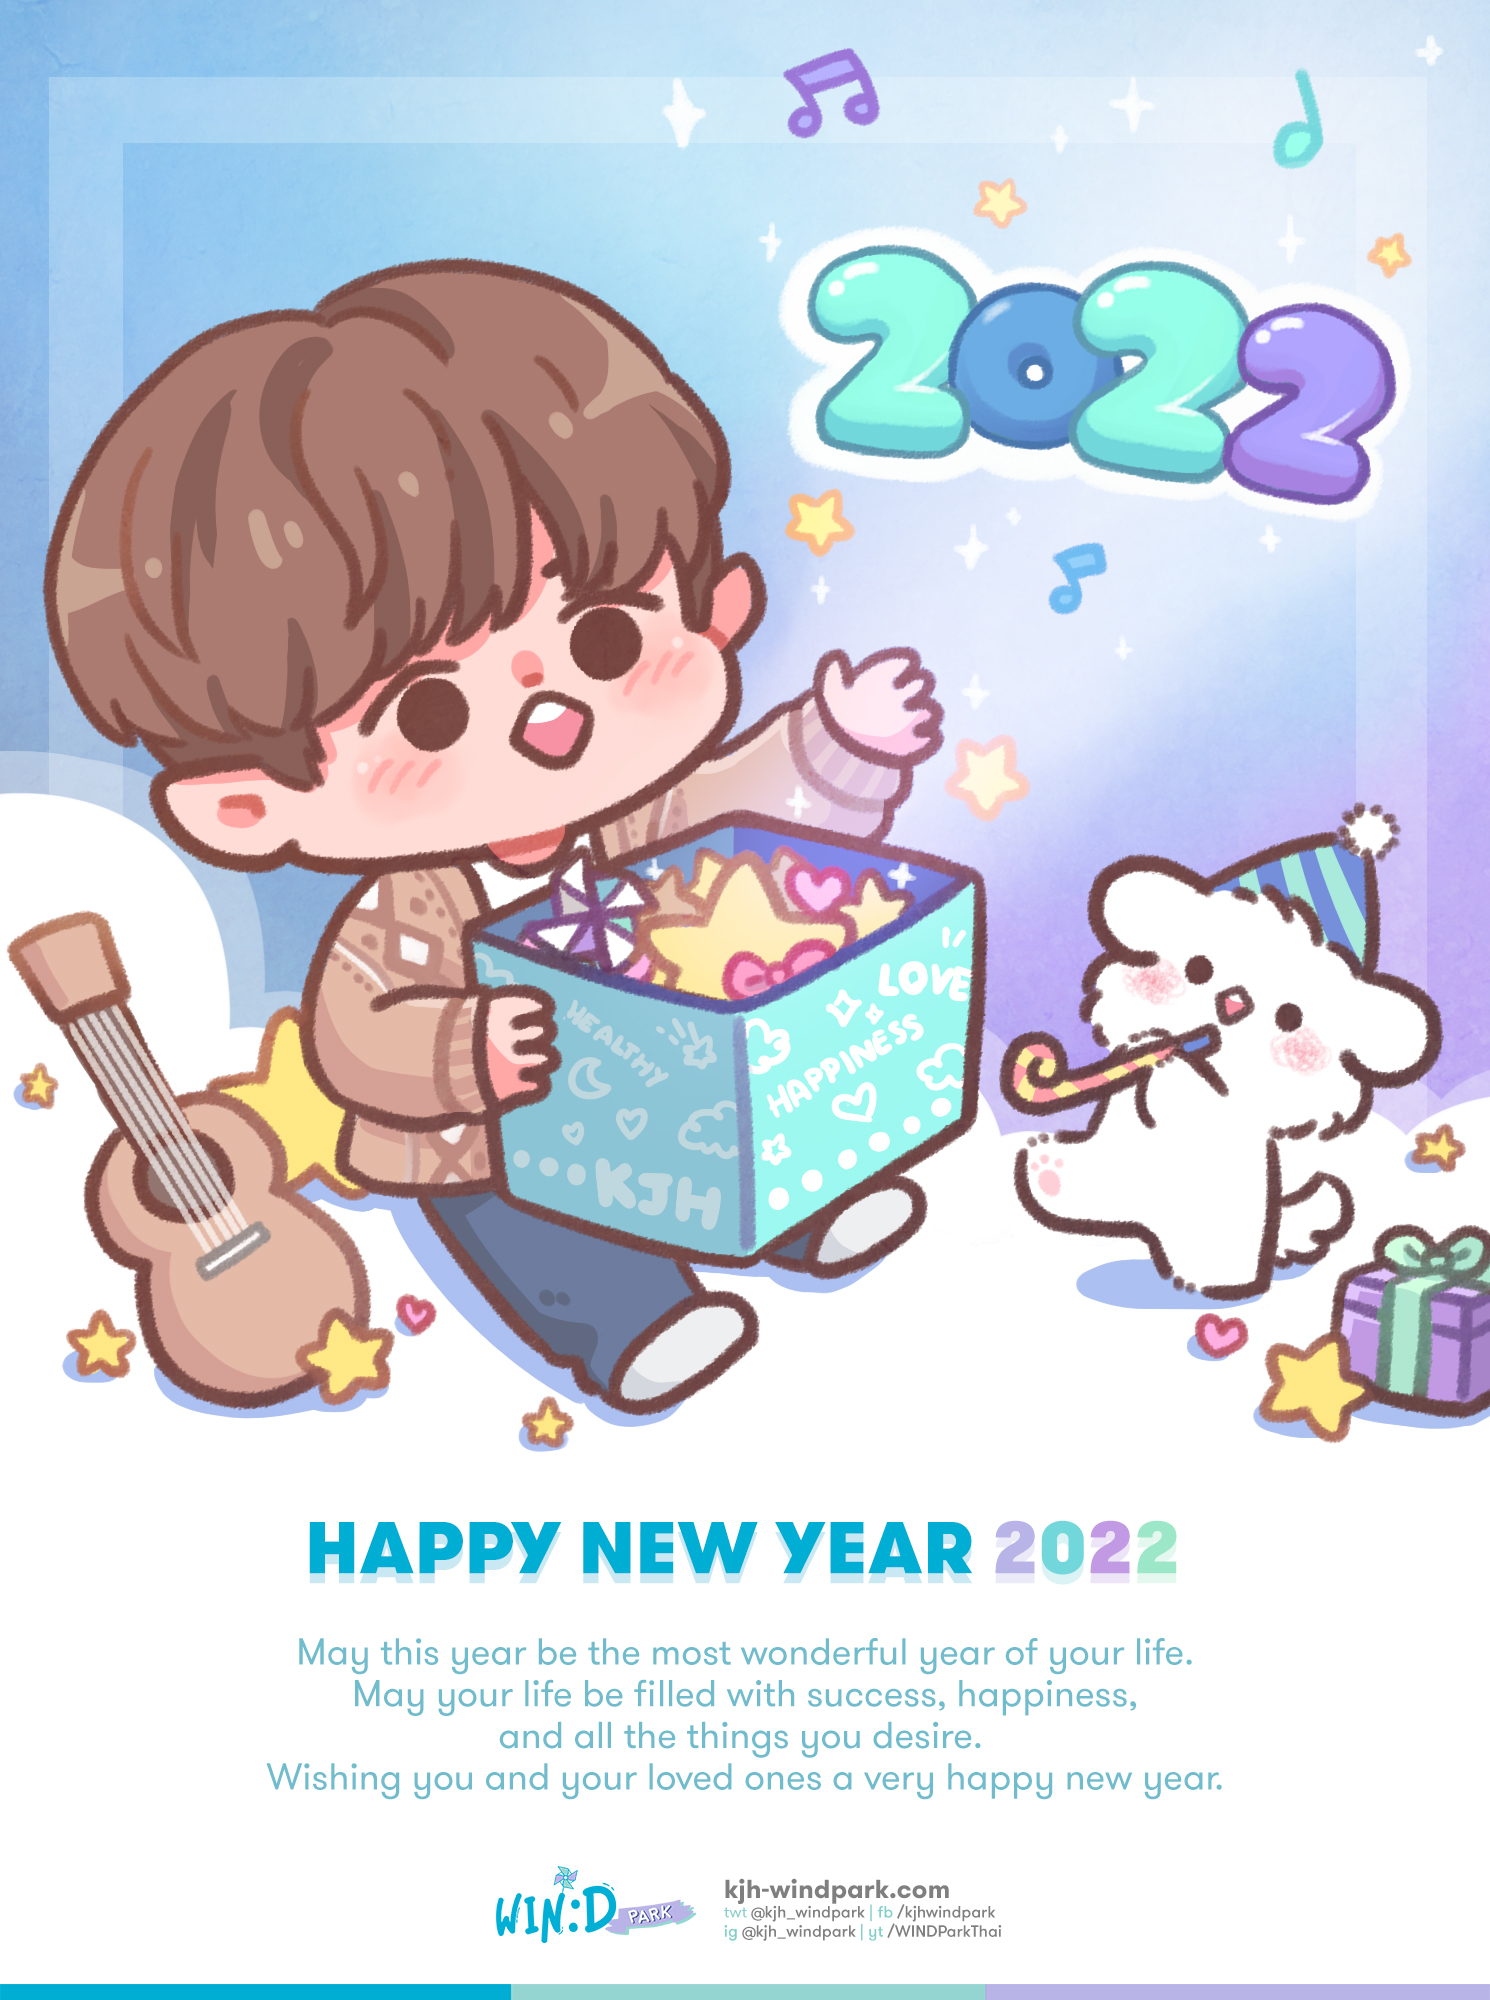 2022's Greeting From WIN:D PARK